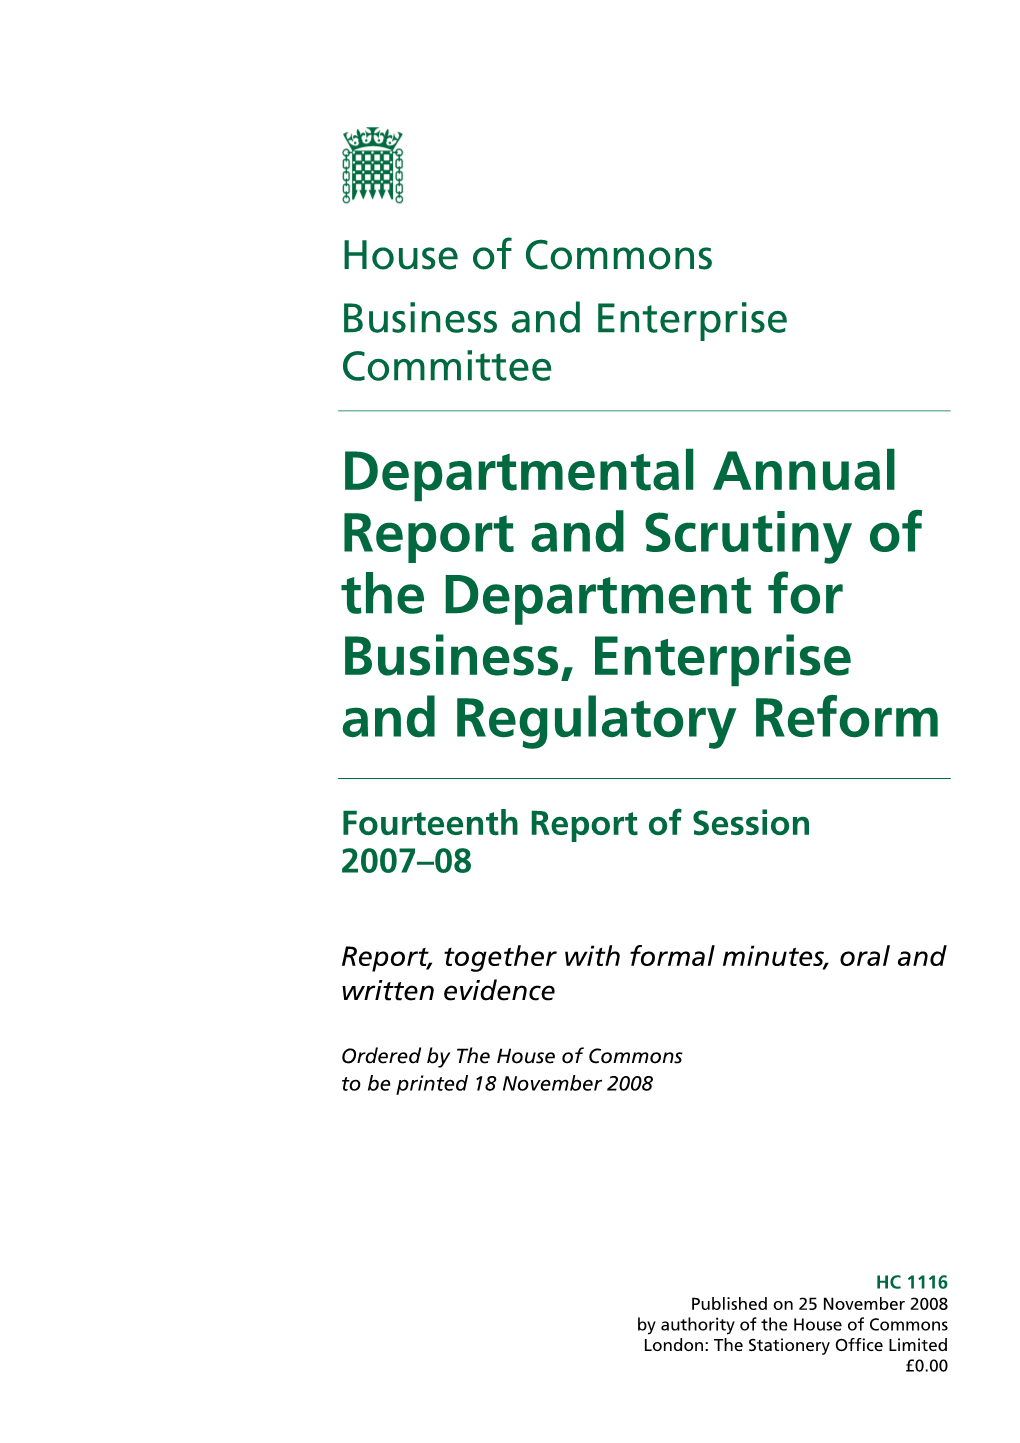 Departmental Annual Report and Scrutiny of the Department for Business, Enterprise and Regulatory Reform